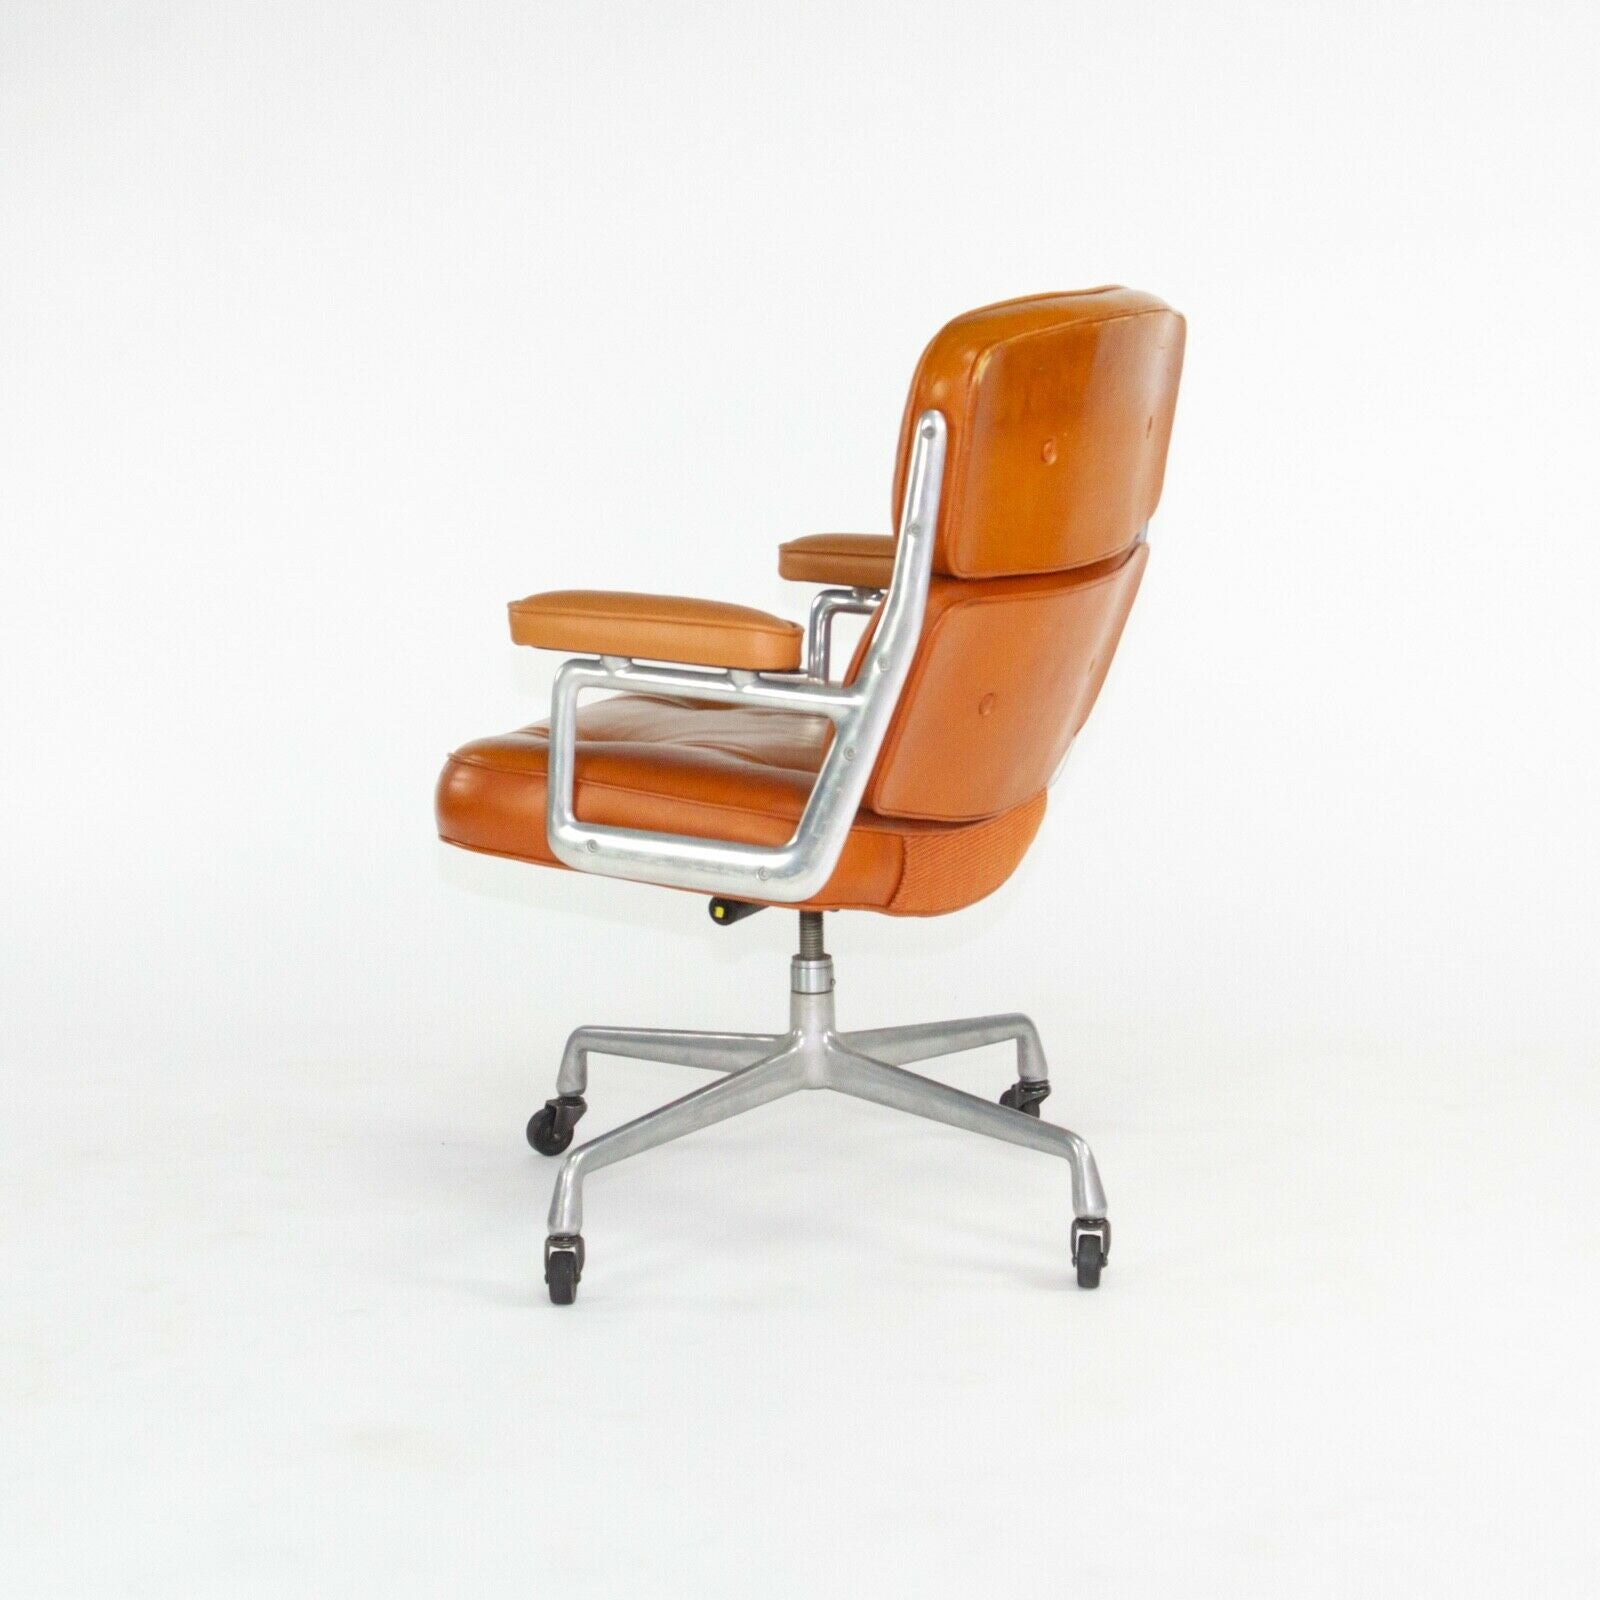 SOLD 1978 Herman Miller Eames Time Life Desk Chair in Cognac Leather Multiple Available